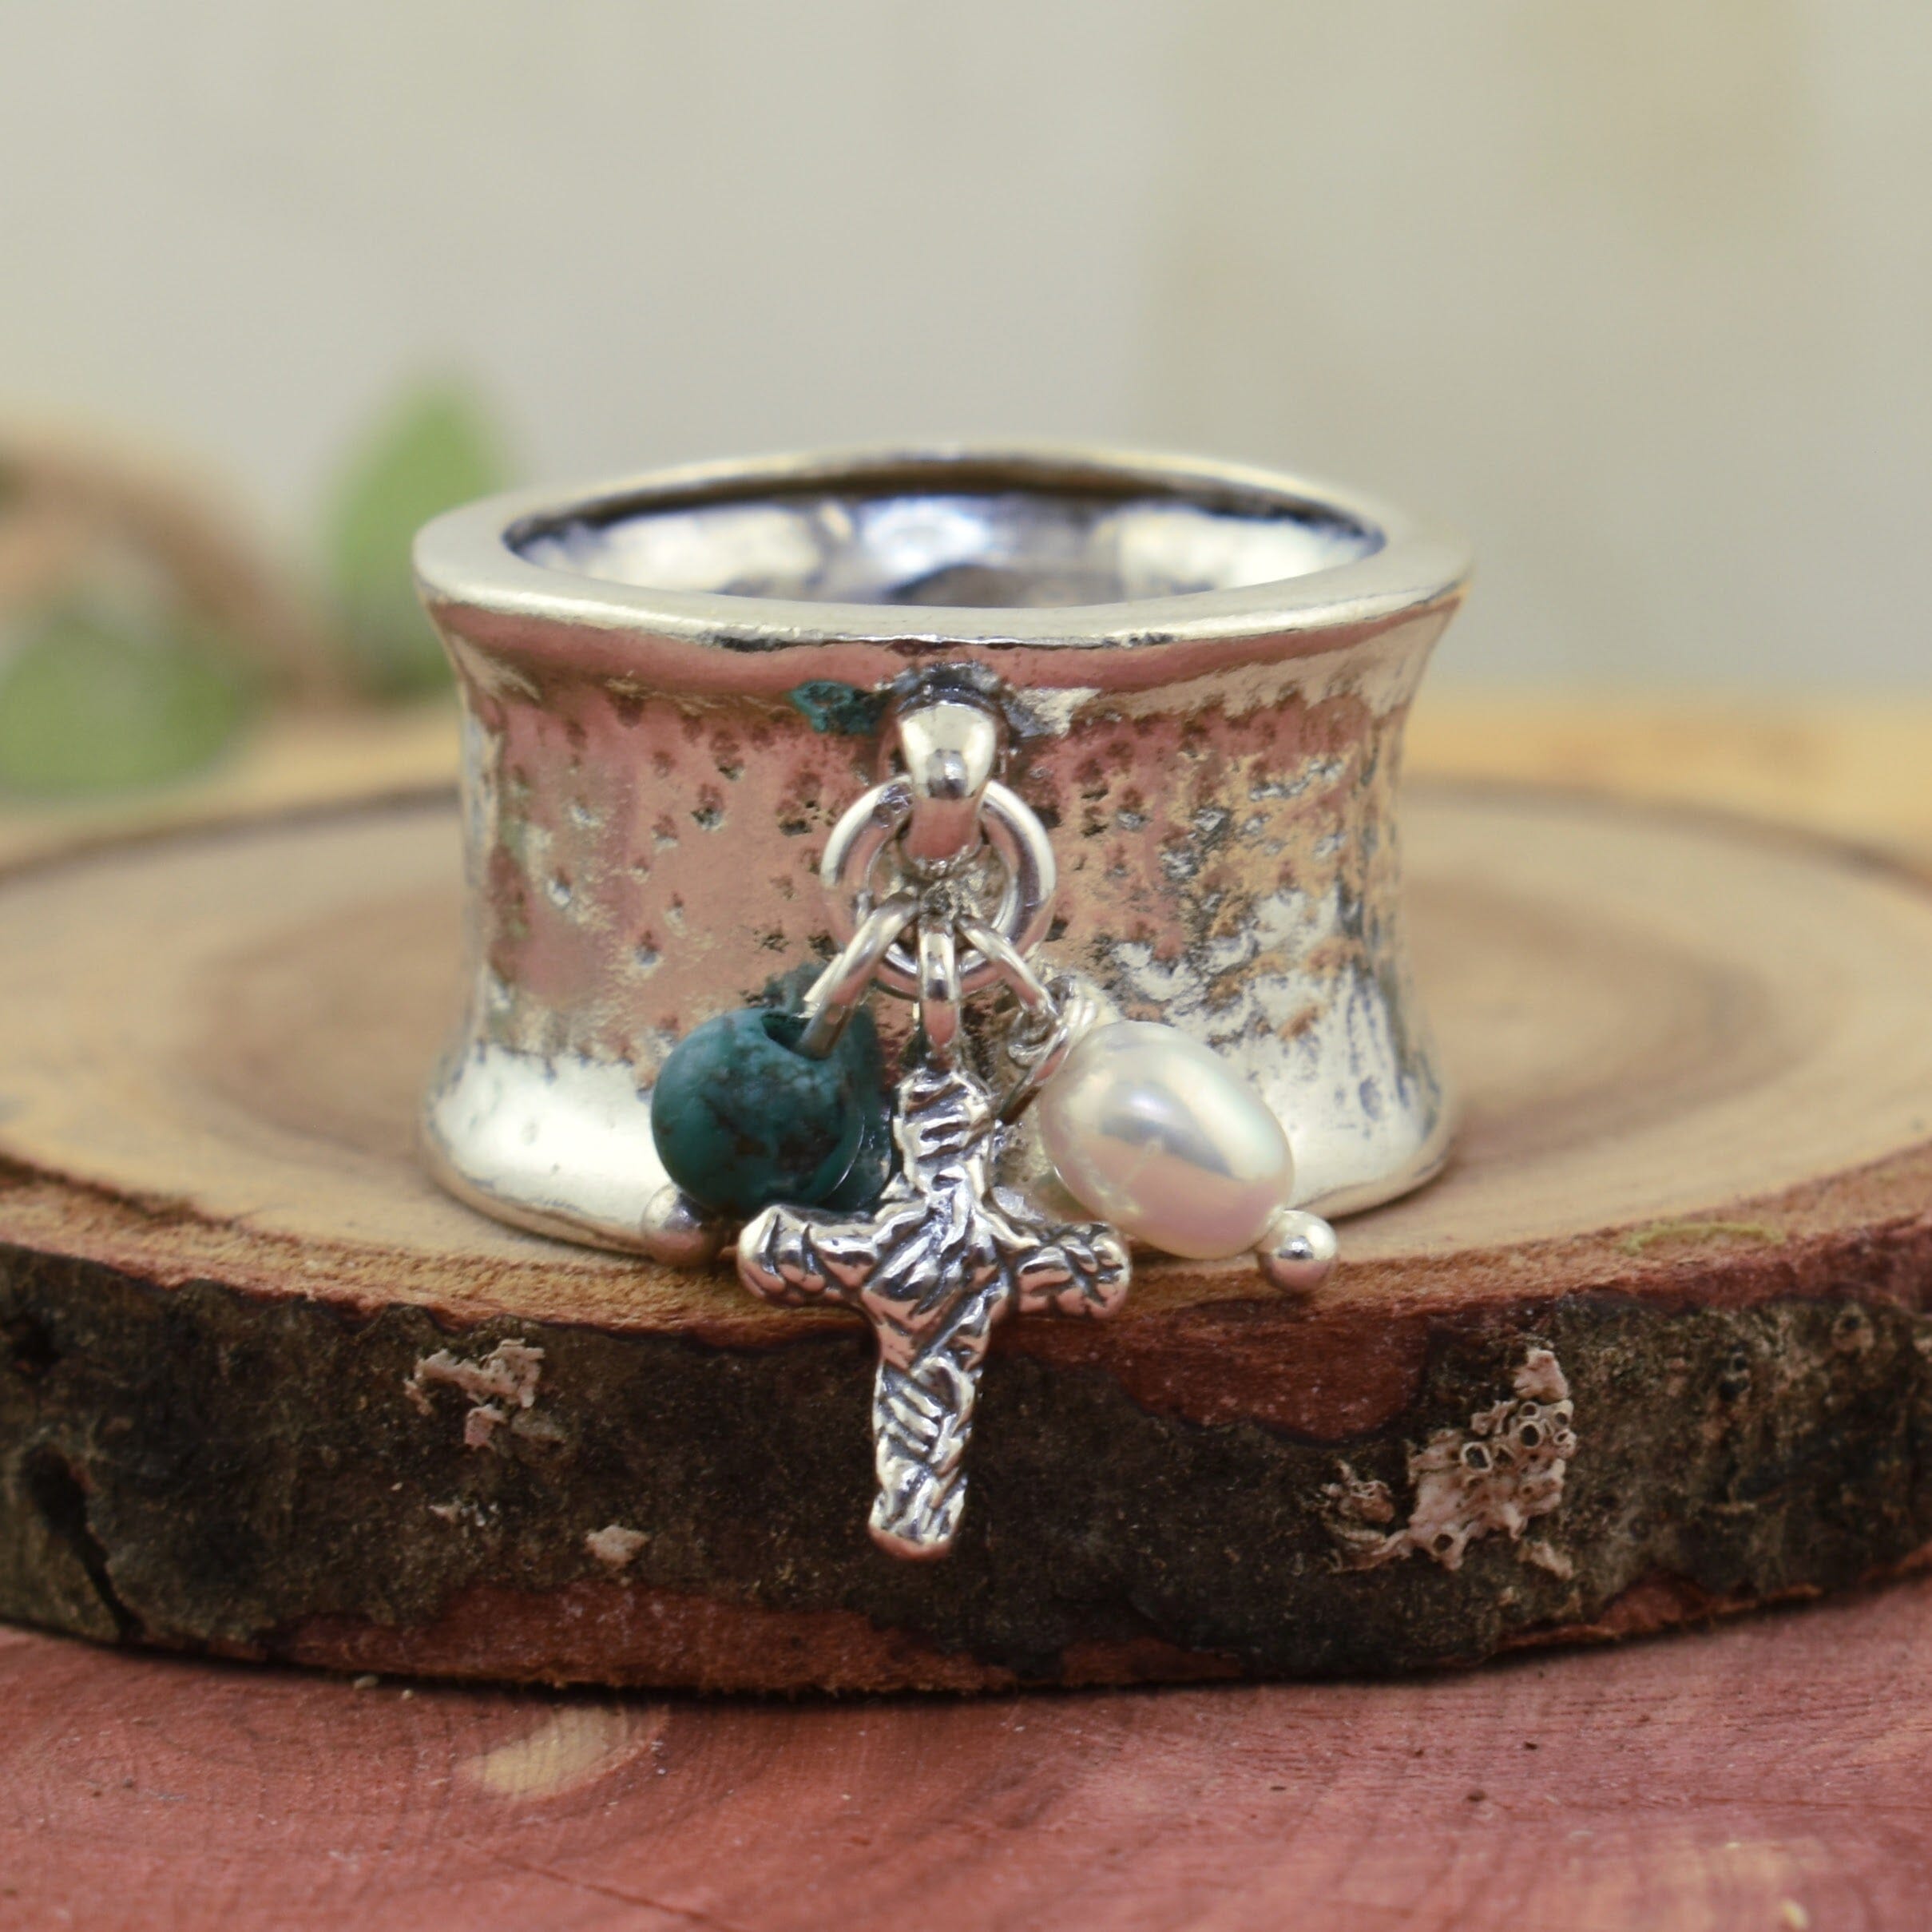 .925 sterling silver ring with turquoise, cross, and freshwater pearl dangles